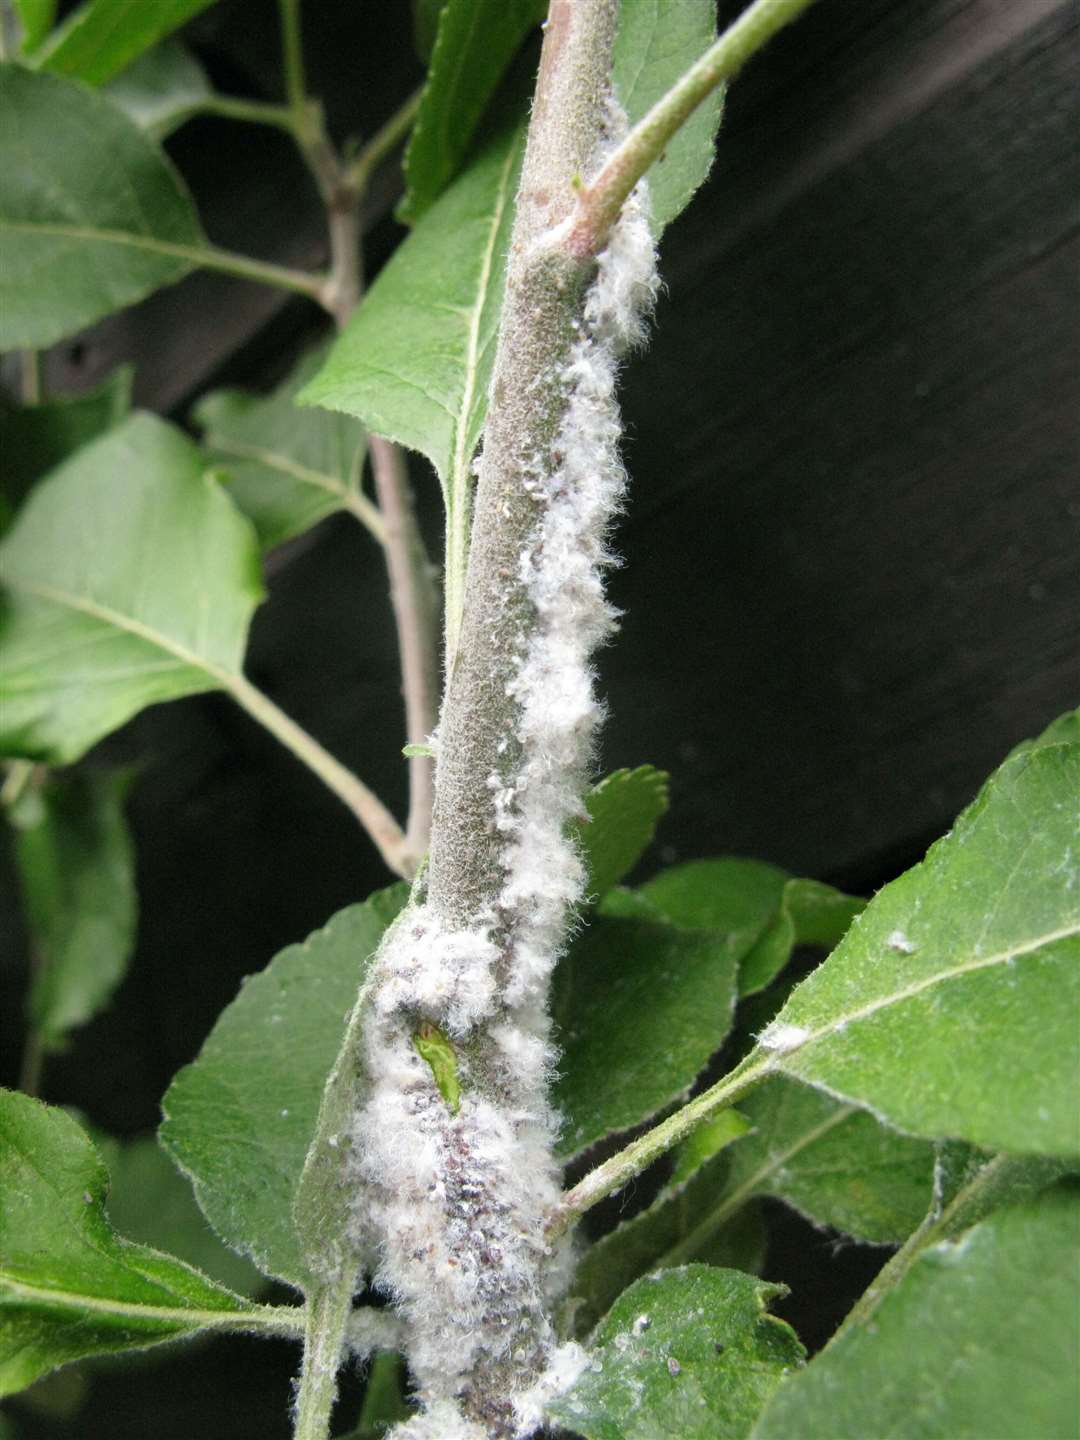 Woolly aphid on an apple tree stem. Picture: Andrew Halstead/RHS/PA